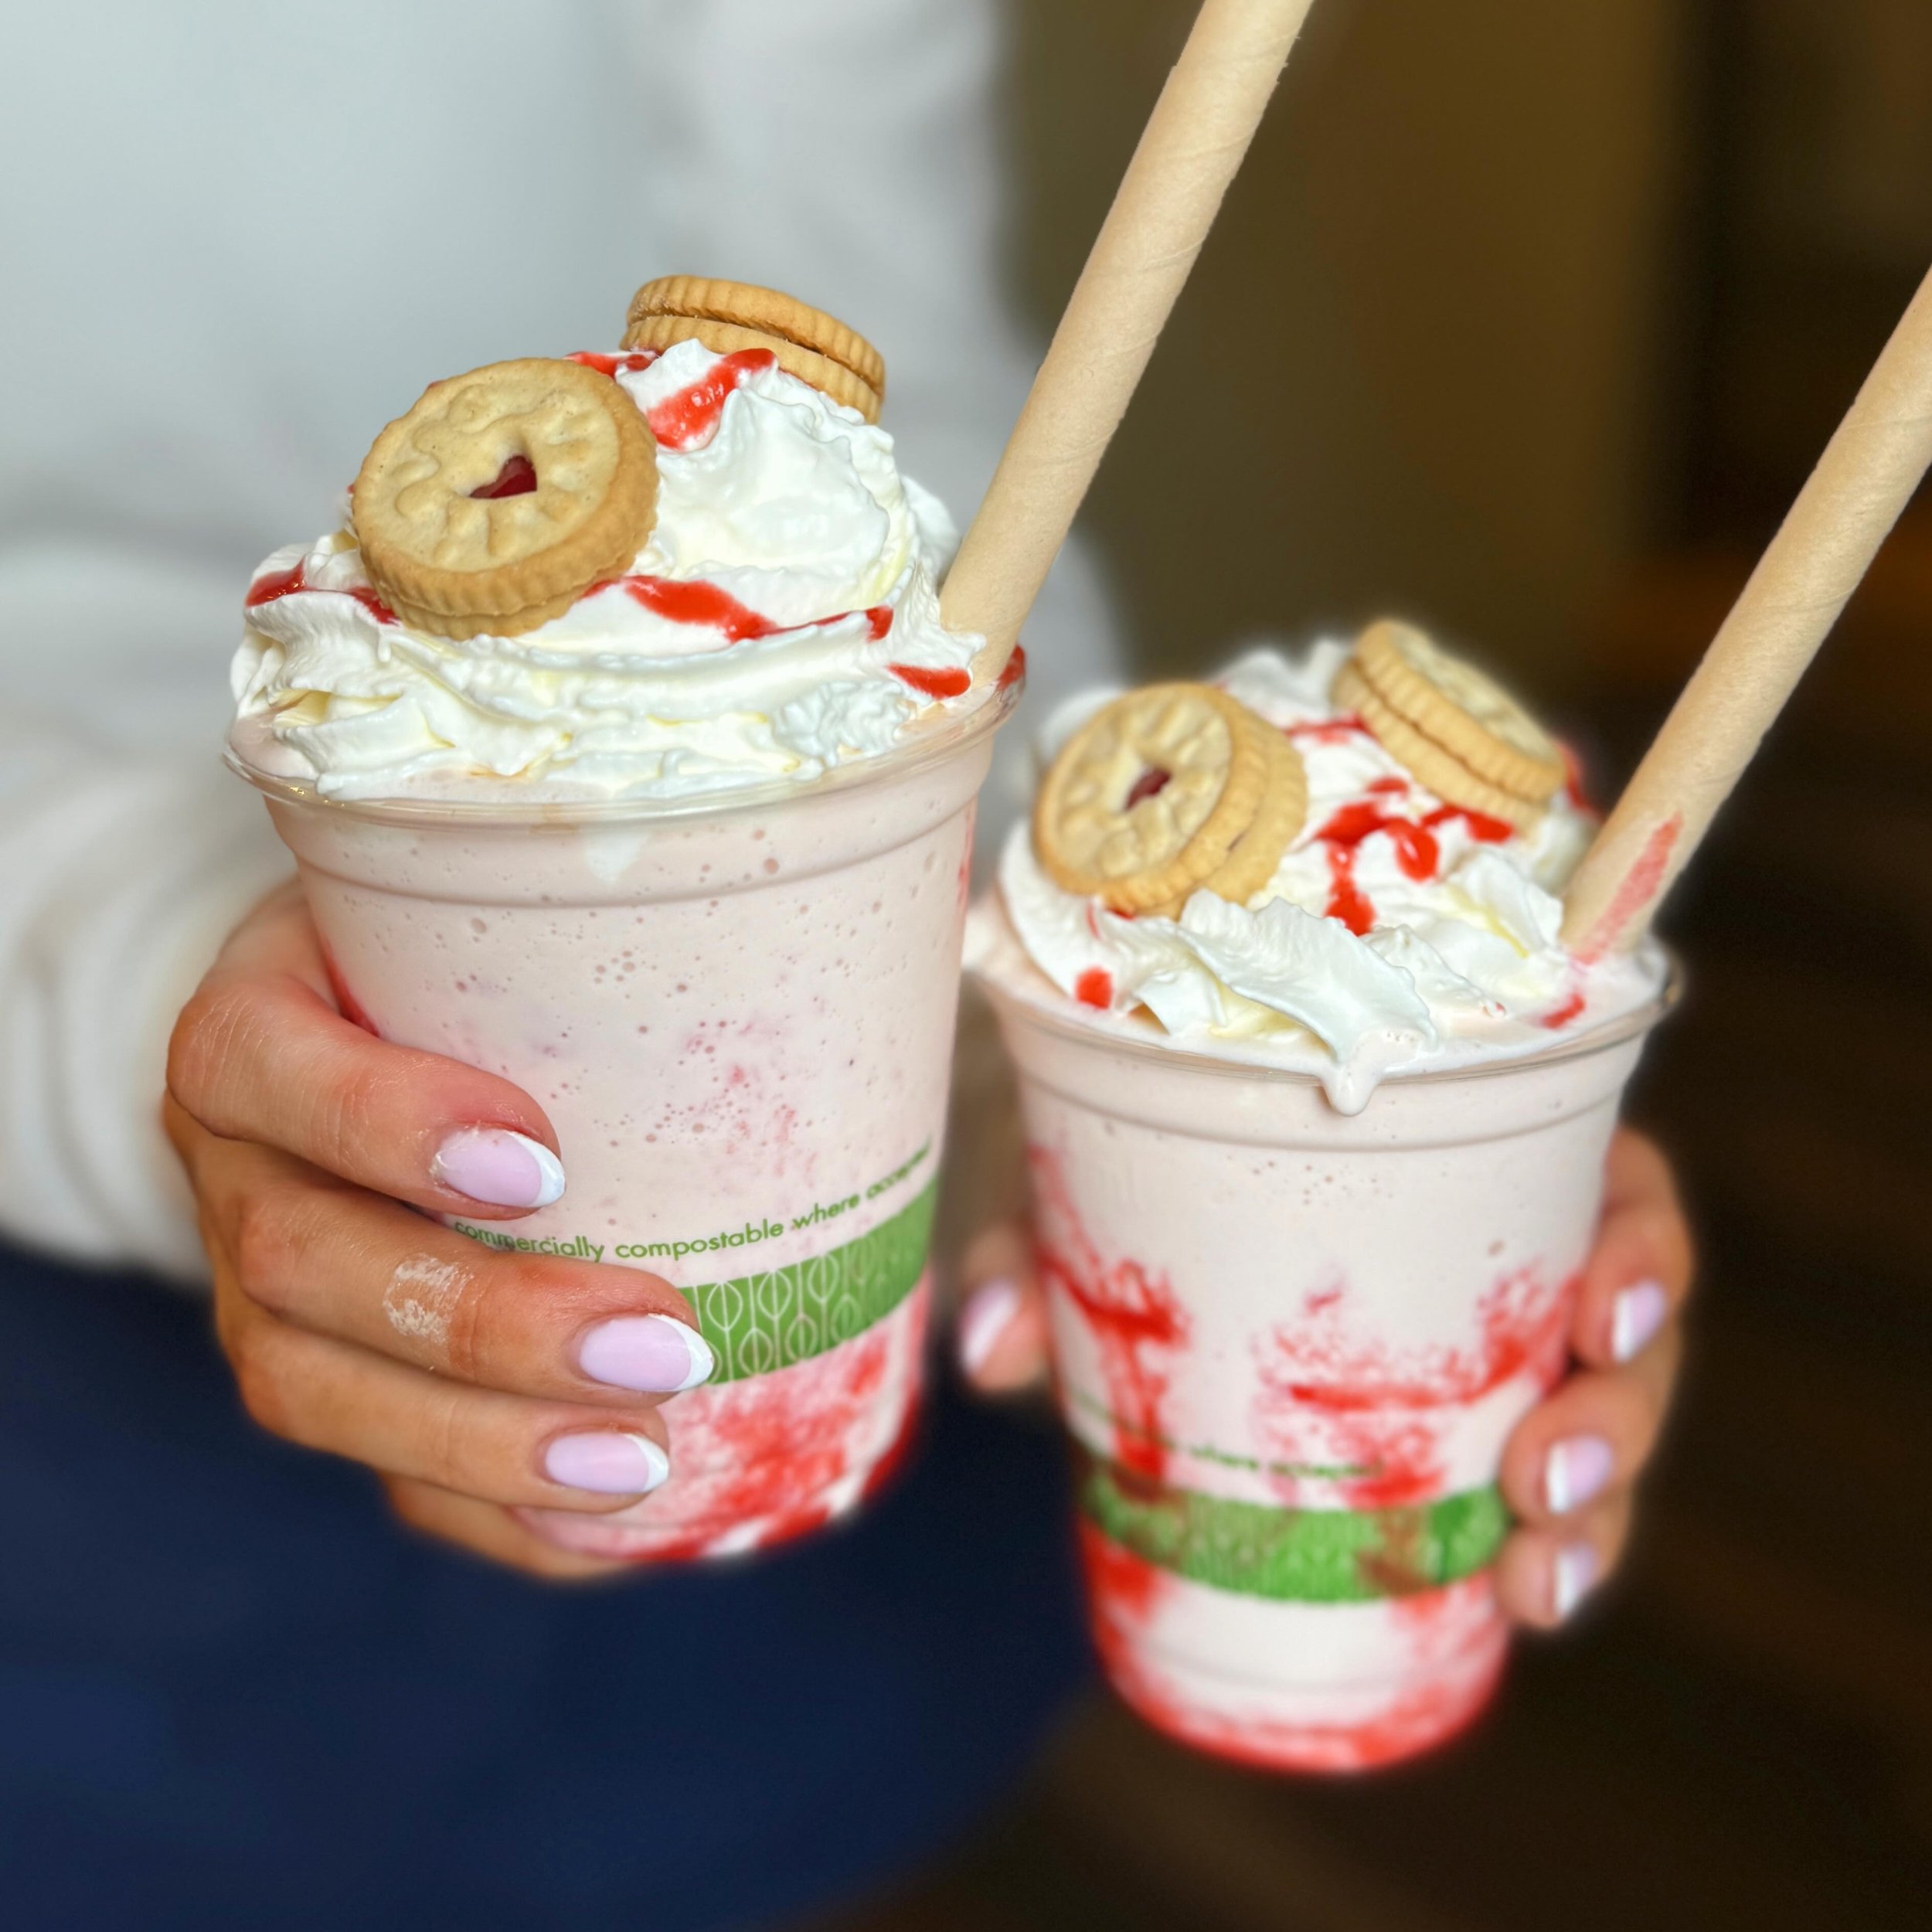 Our jammy dodger freakshake has become a firm favourite. 💘🍓

#freakshake #milkshake #strawberrymilkshake #cobblesandclayhaworth #cobblesandclay